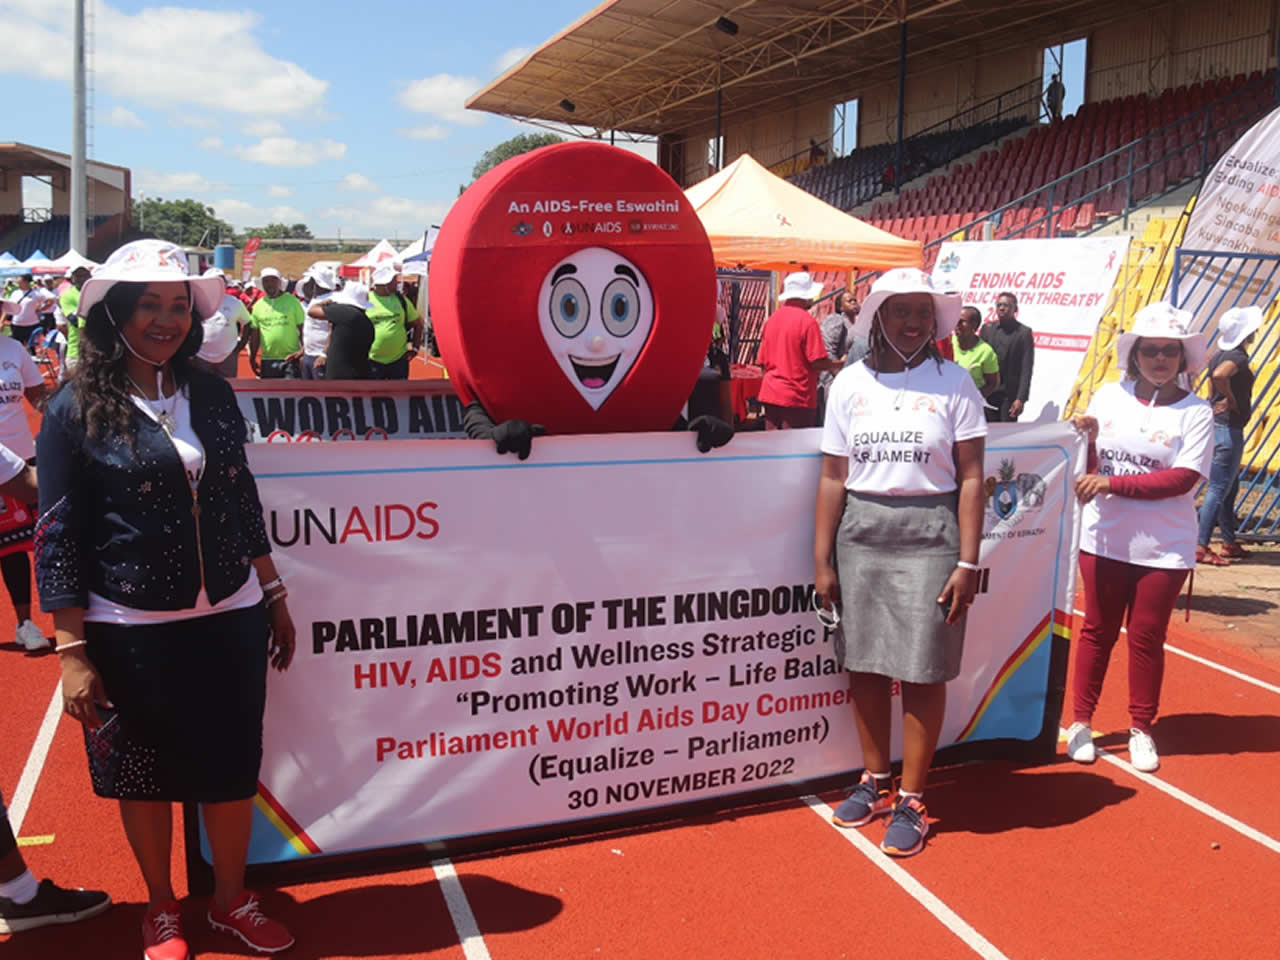 Launch of the HIV/AIDS Wellness Strategic Plan